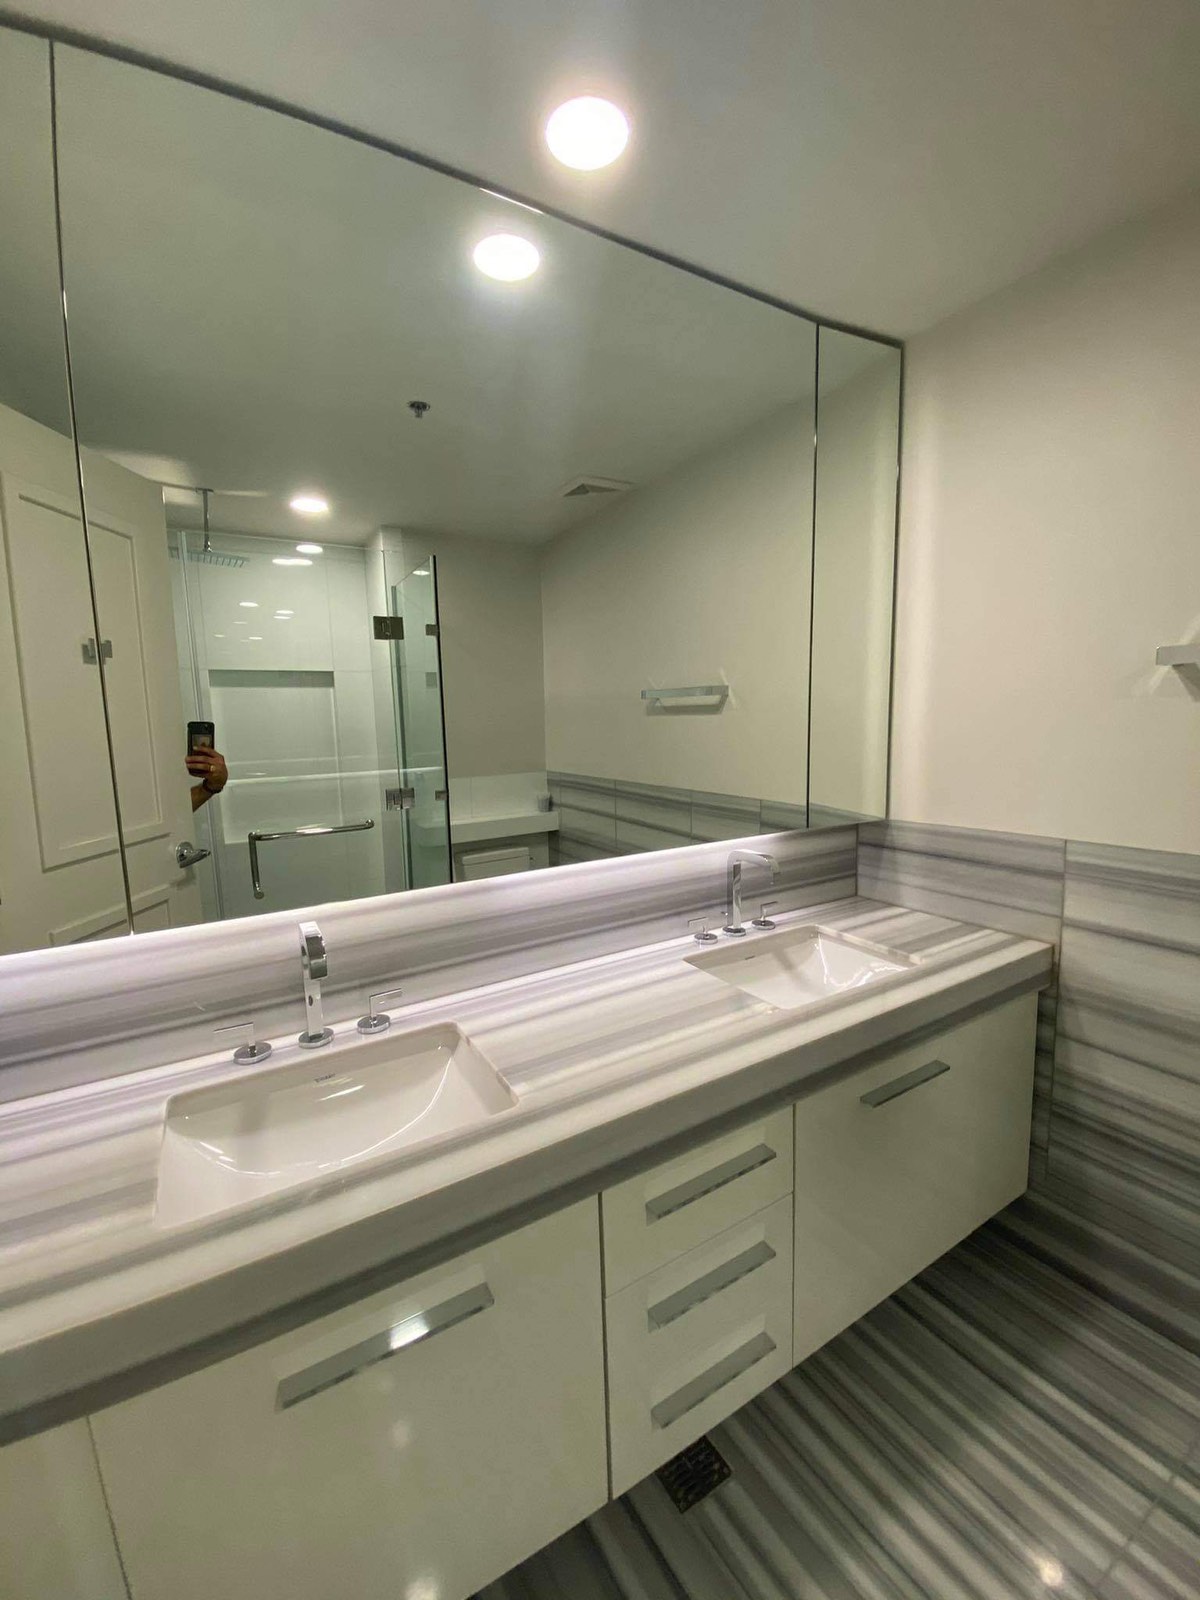 For Sale: Brand New Unit Condo Located At Proscenium Makati By Rockwell